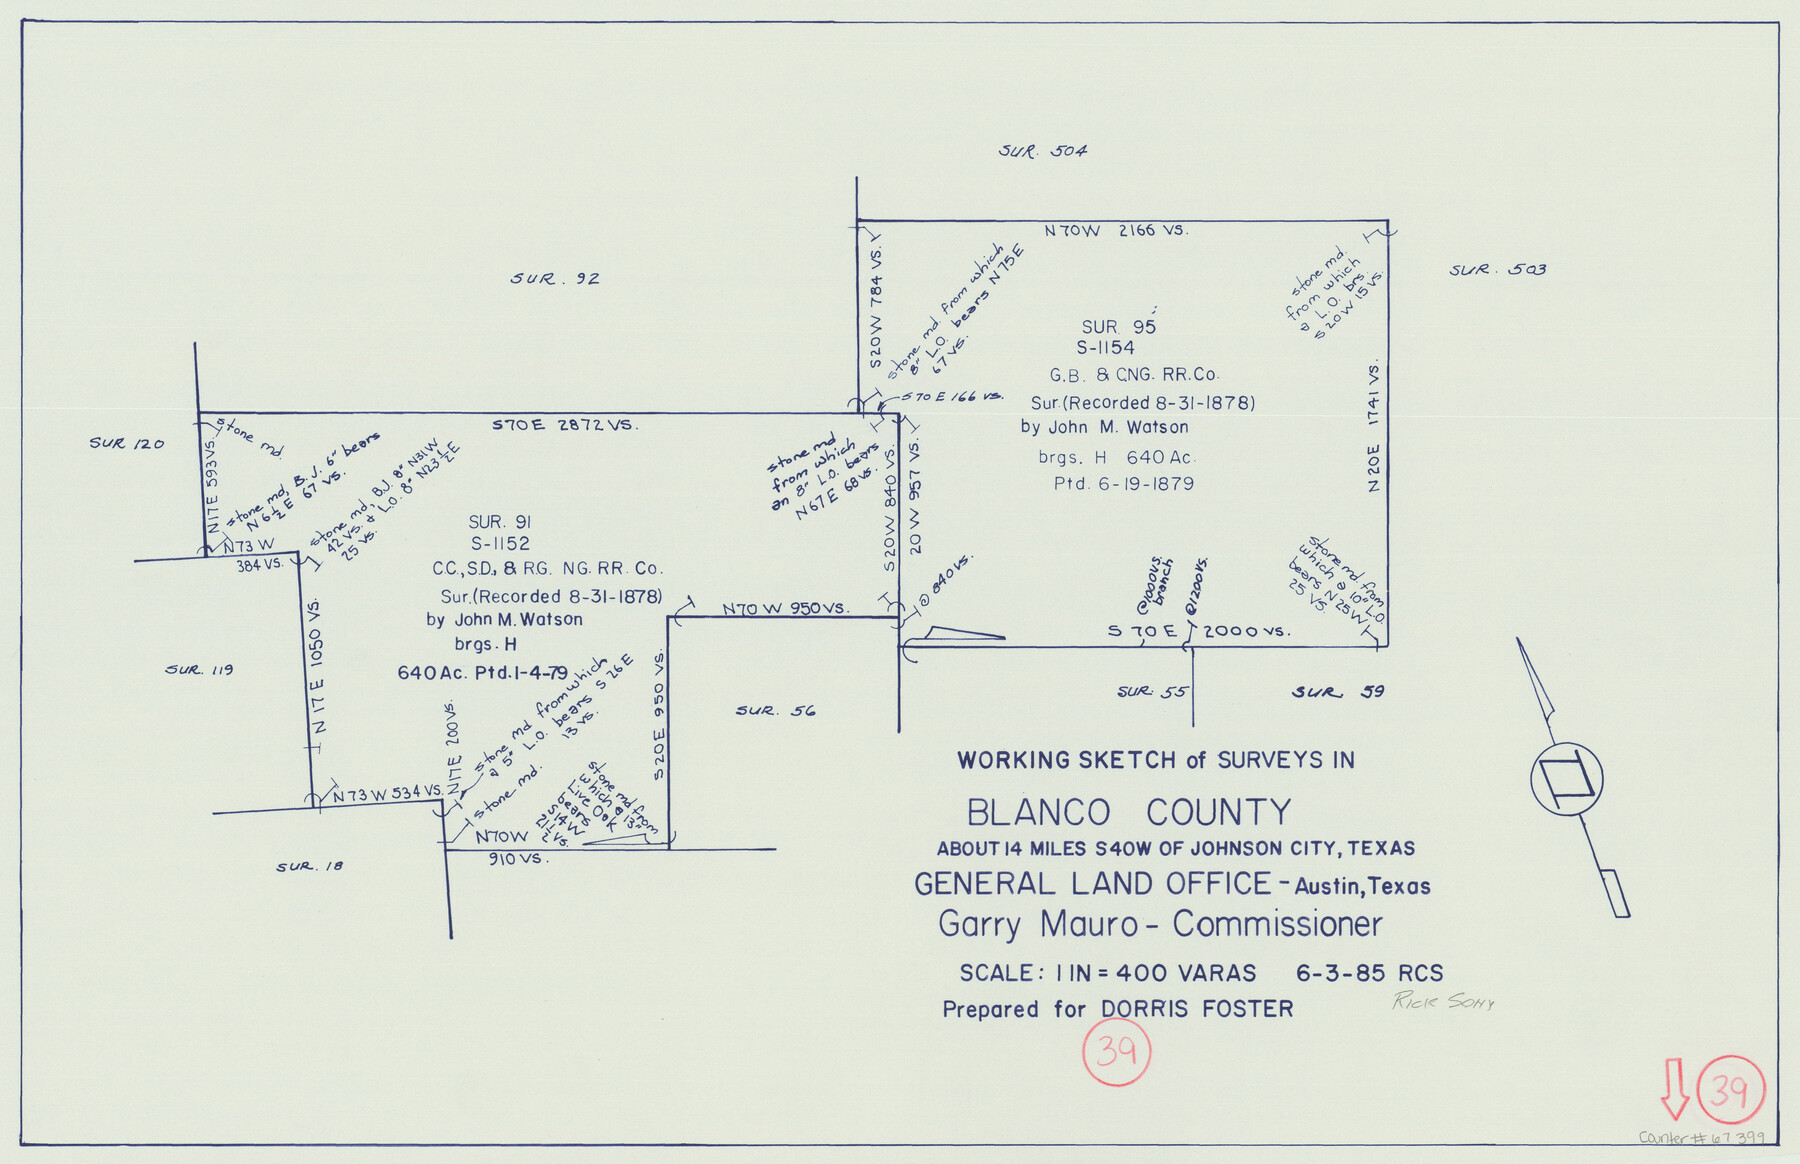 67399, Blanco County Working Sketch 39, General Map Collection